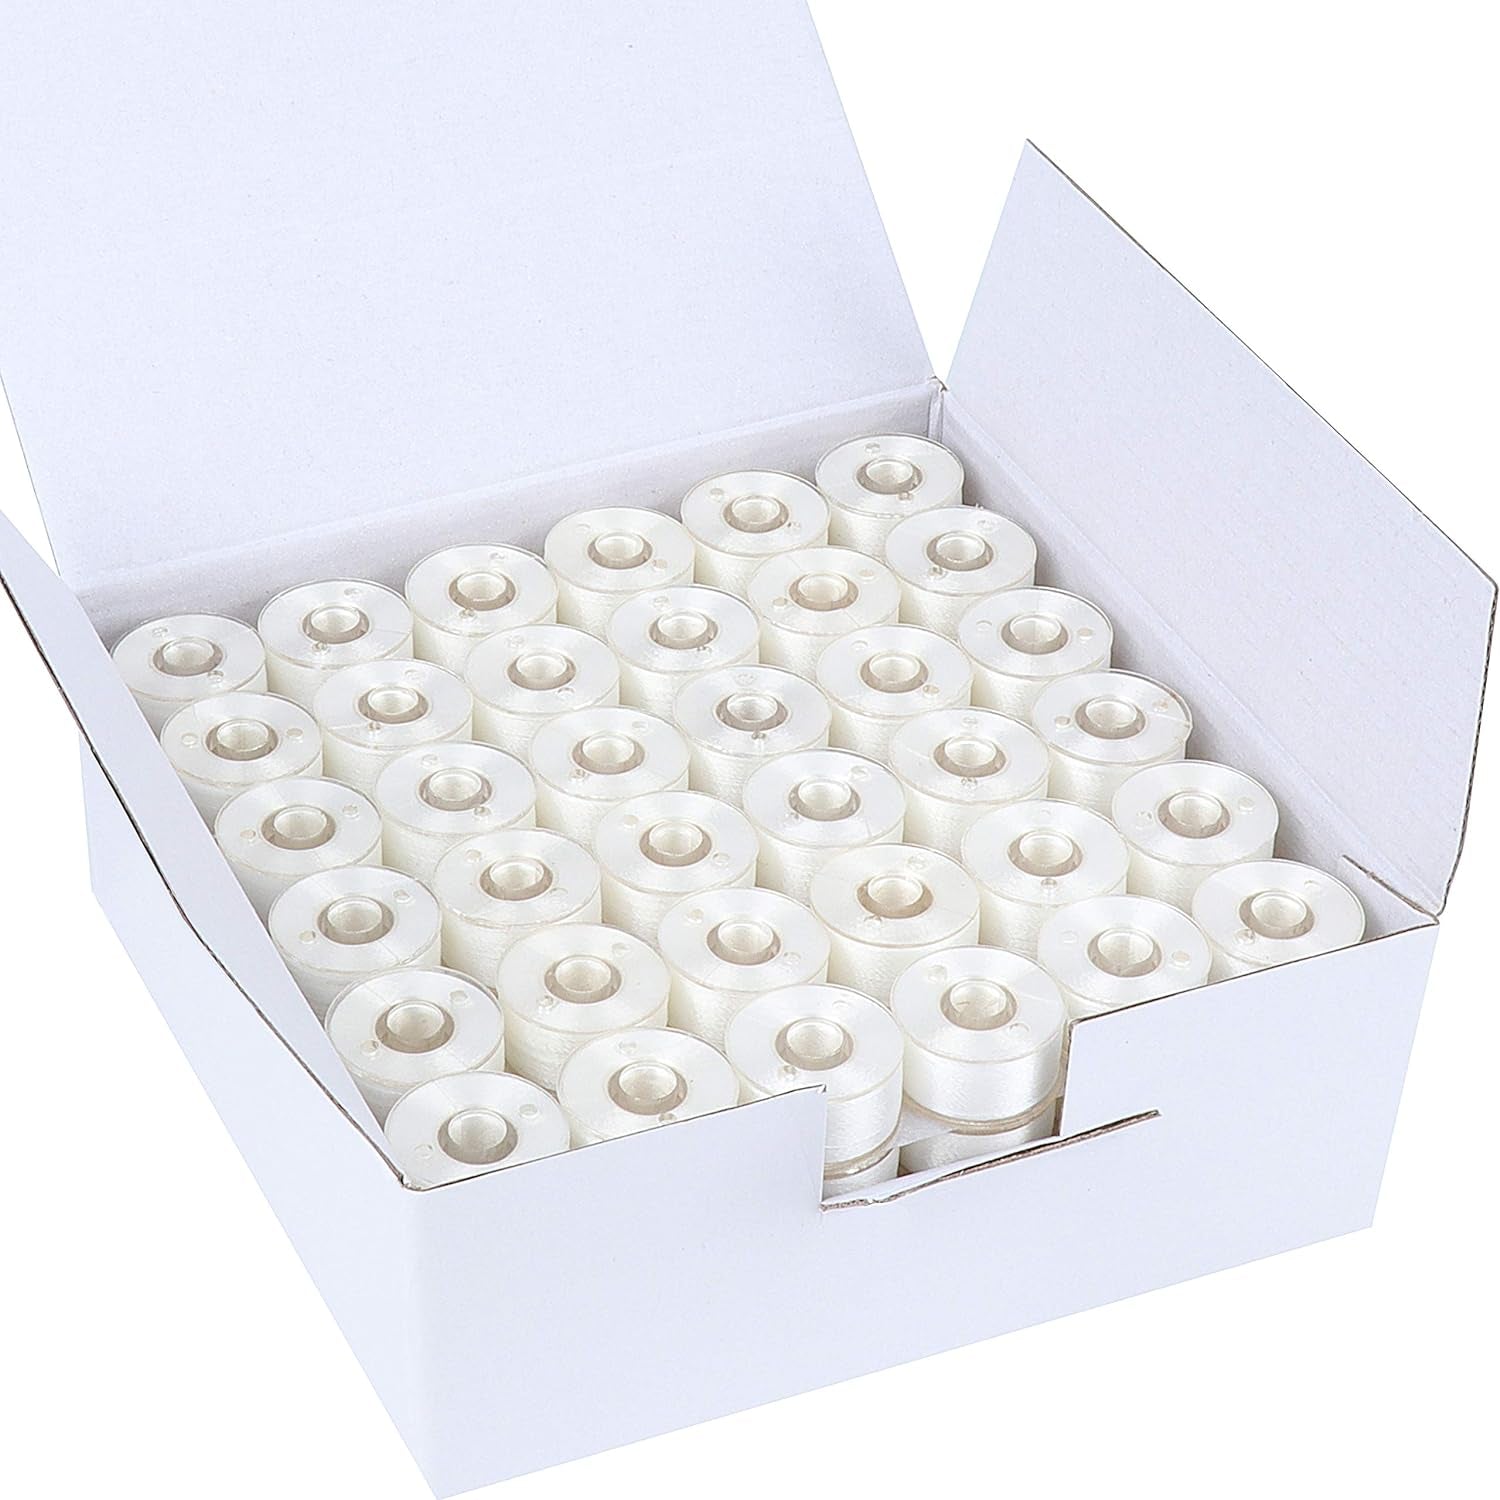 144Pcs White 60S/2(90WT) Prewound Bobbin Thread Plastic Size a SA156 for Embroidery and Sewing Machine Cottonized Soft Feel Polyester Thread Sewing Thread